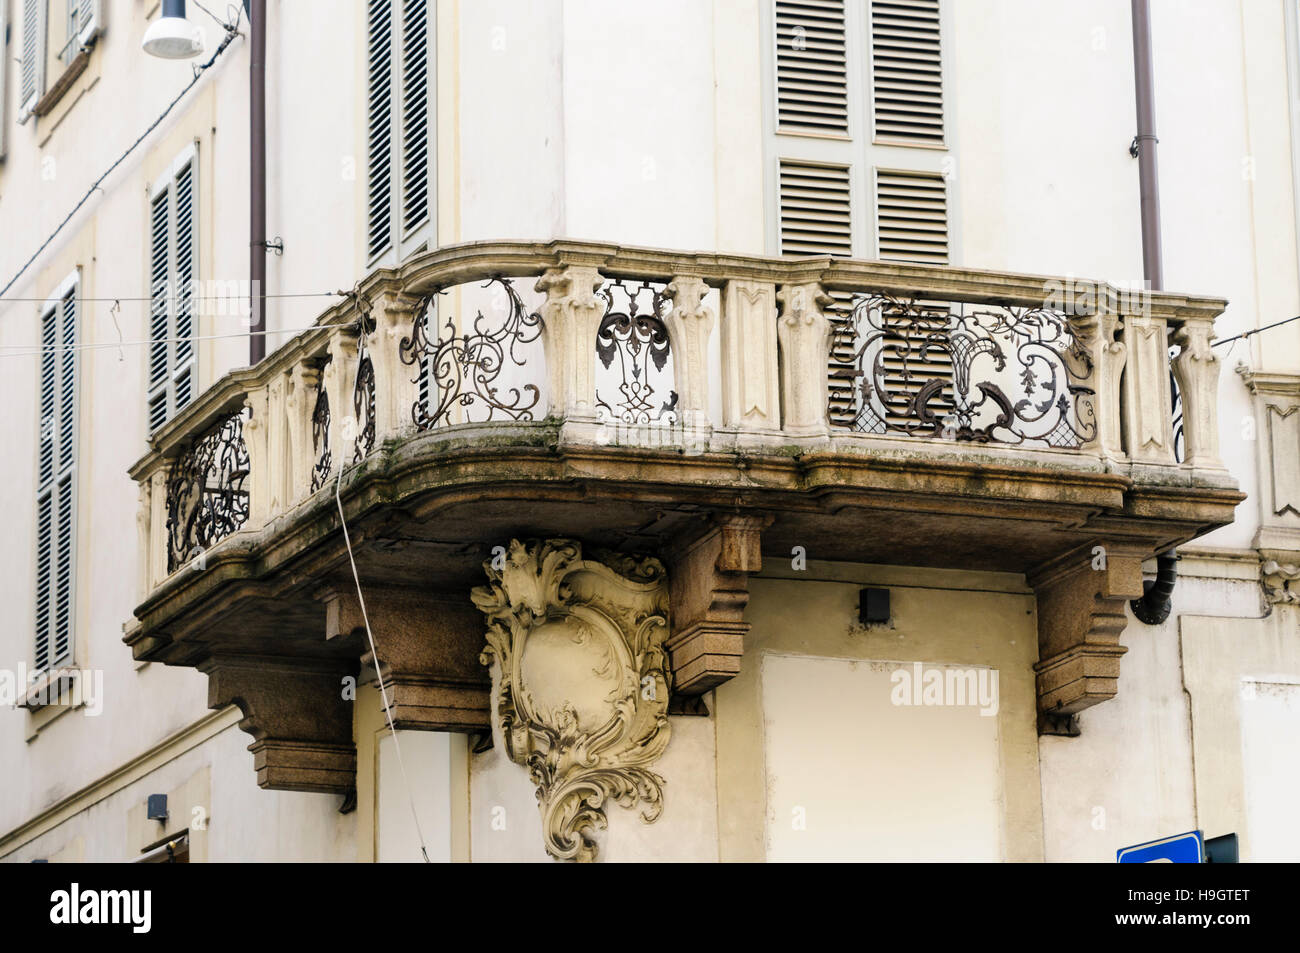 Balcony with iron insets on a building in Milan, Italy. Stock Photo